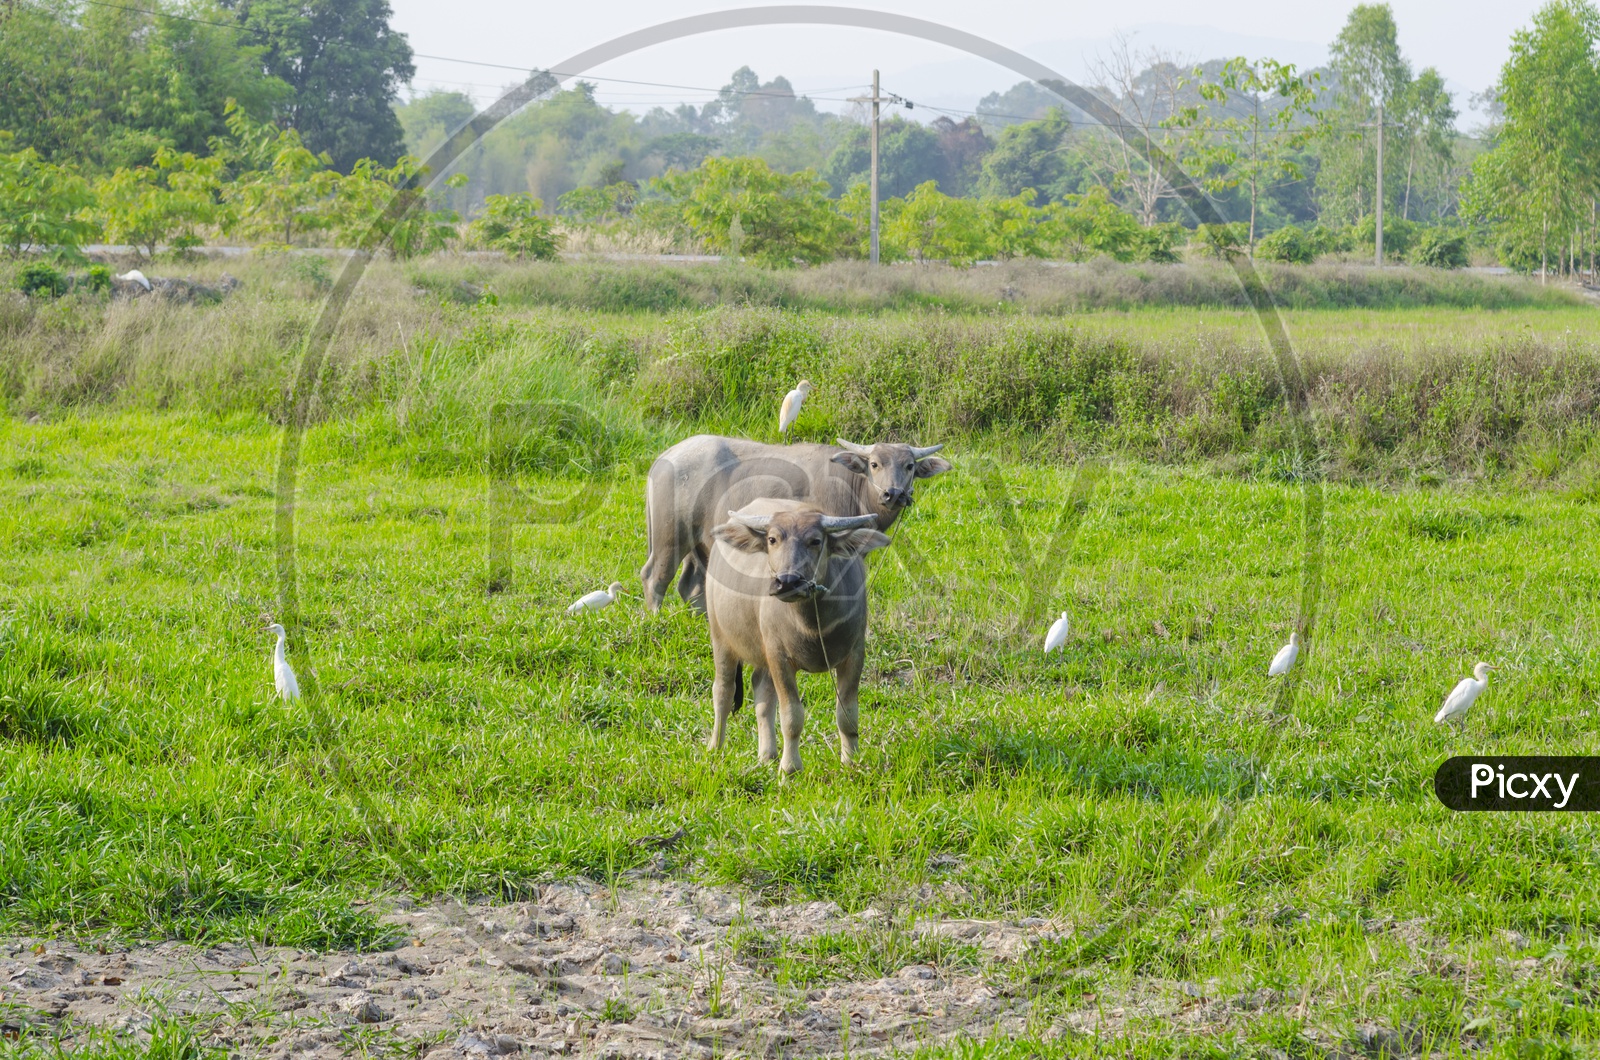 Water buffaloes in a Agriculture Field, Thailand